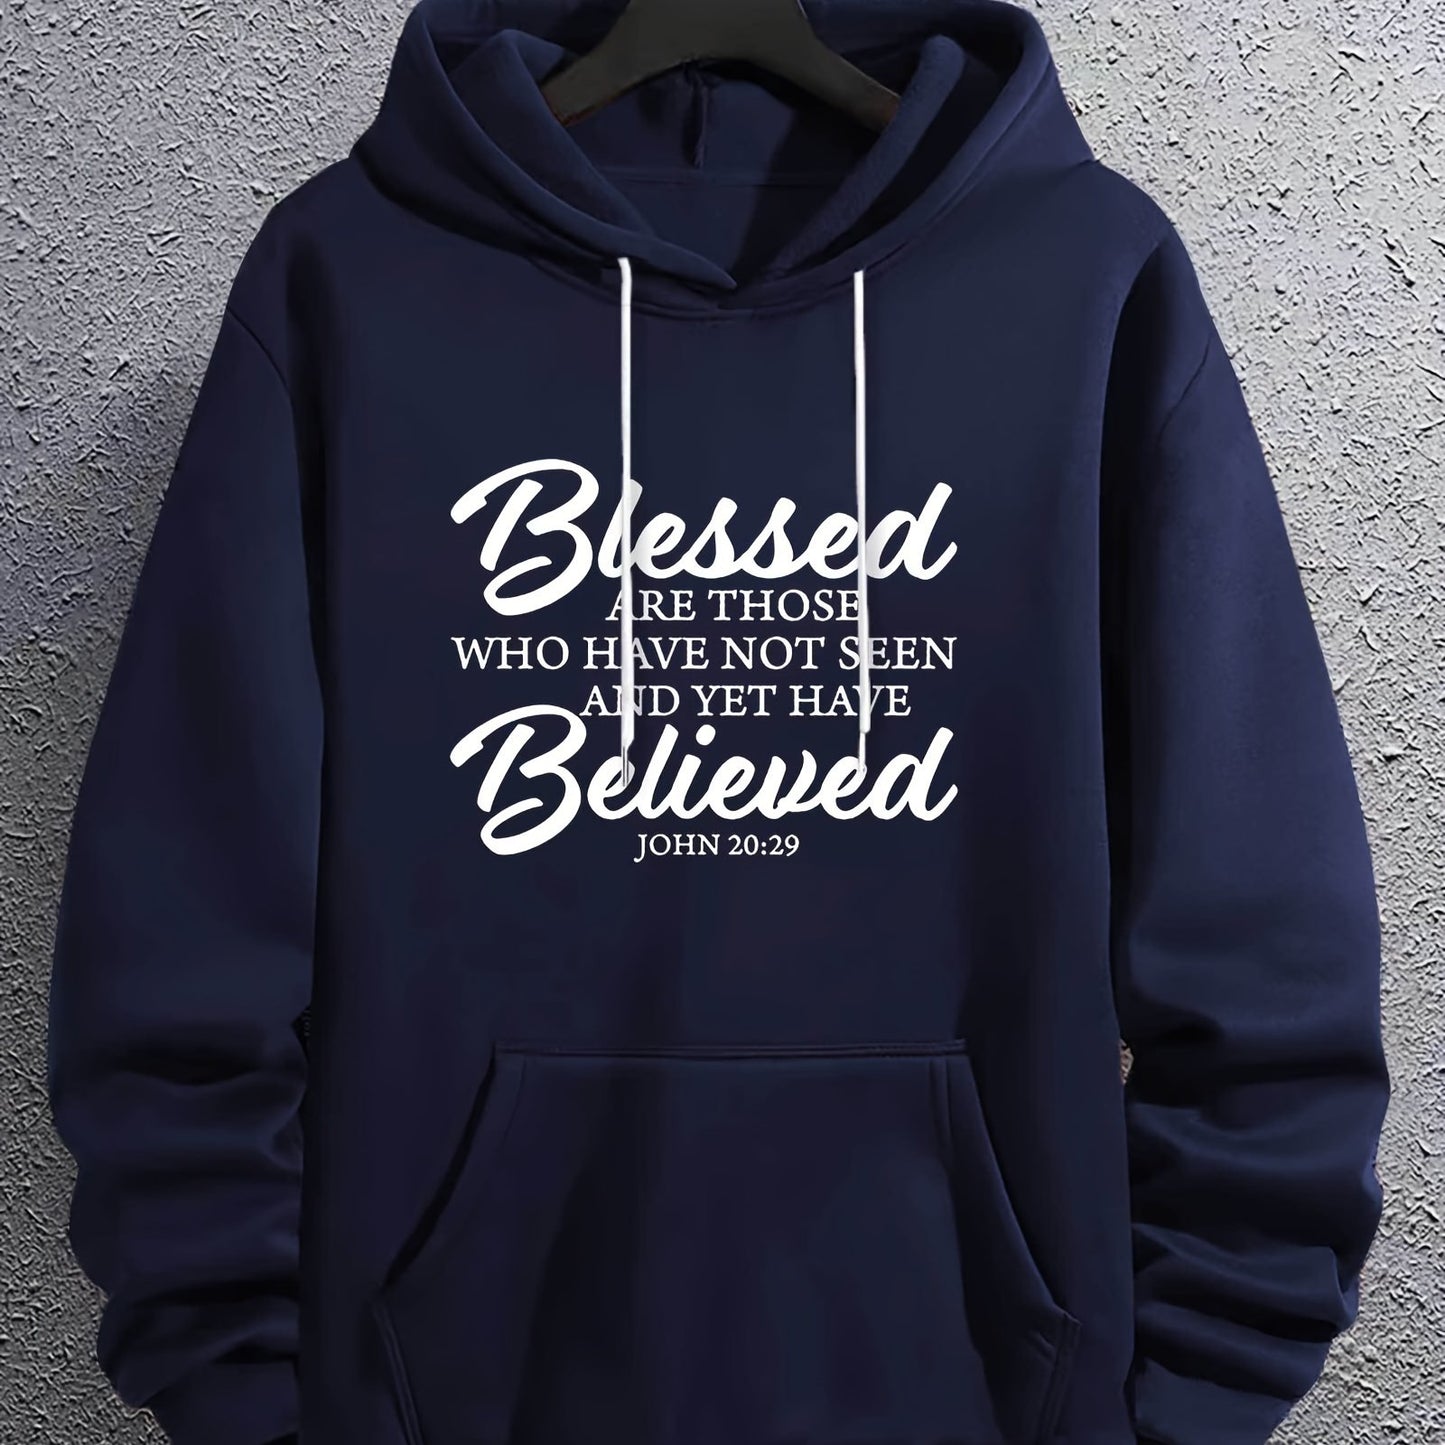 John 20:29 Blessed Are Those Who Have Not Seen & Yet Have Believed Unisex Christian Pullover Hooded Sweatshirt claimedbygoddesigns